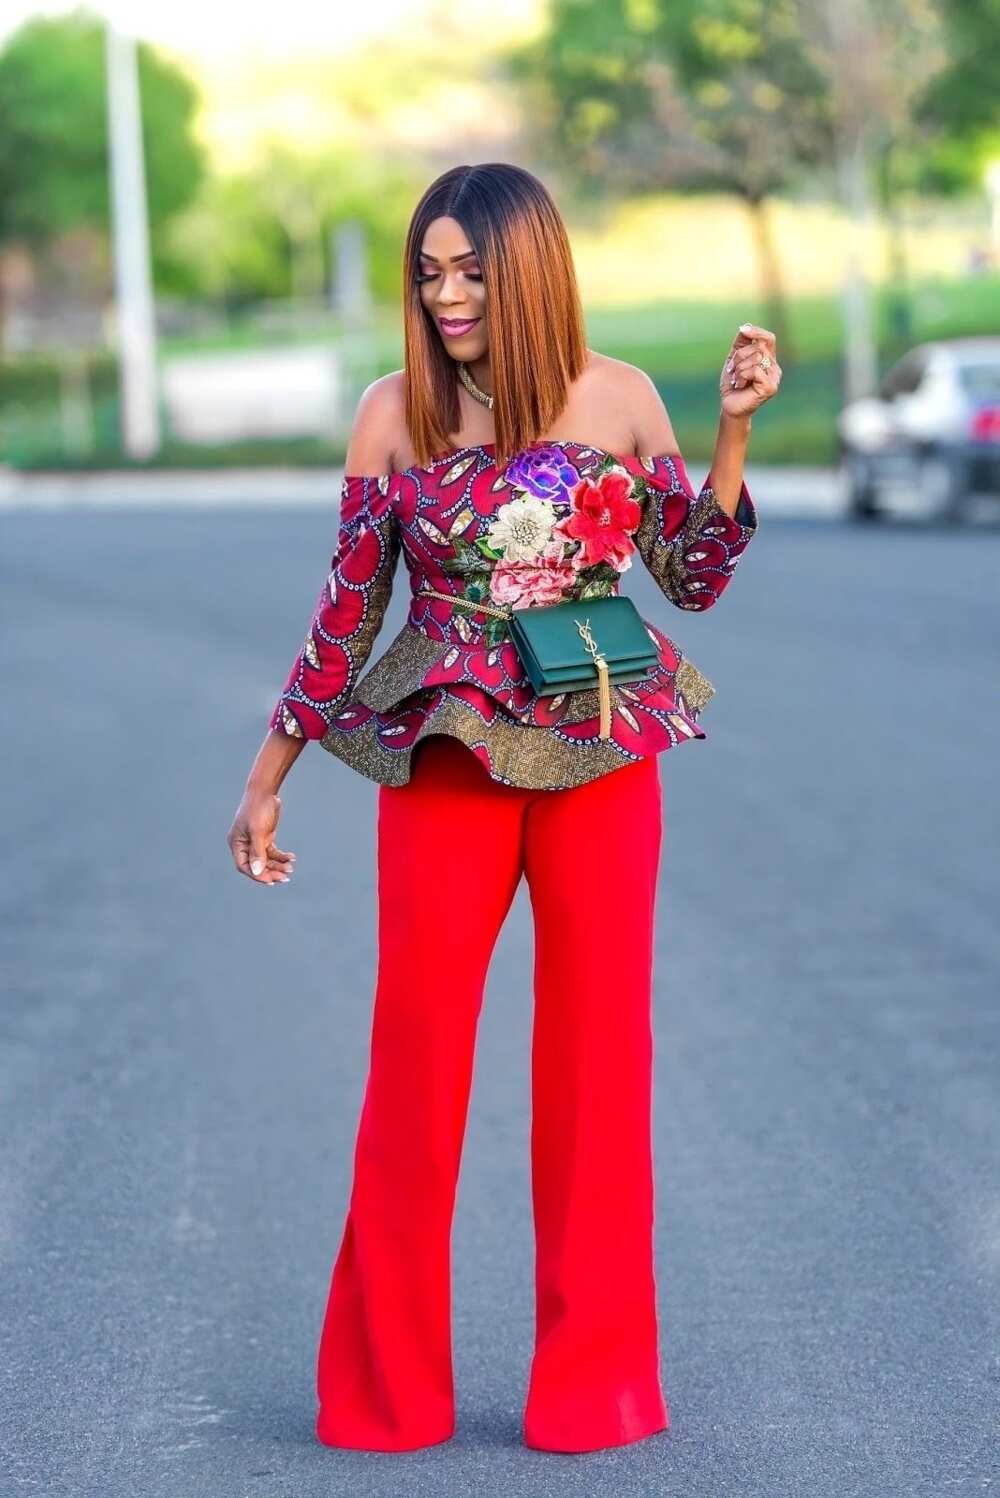 ankara tops for ladies
stylish tops to wear with jeans
ankara blouse on jeans
trendy styles made with ankara
peplum ankara tops
ankara tops designs